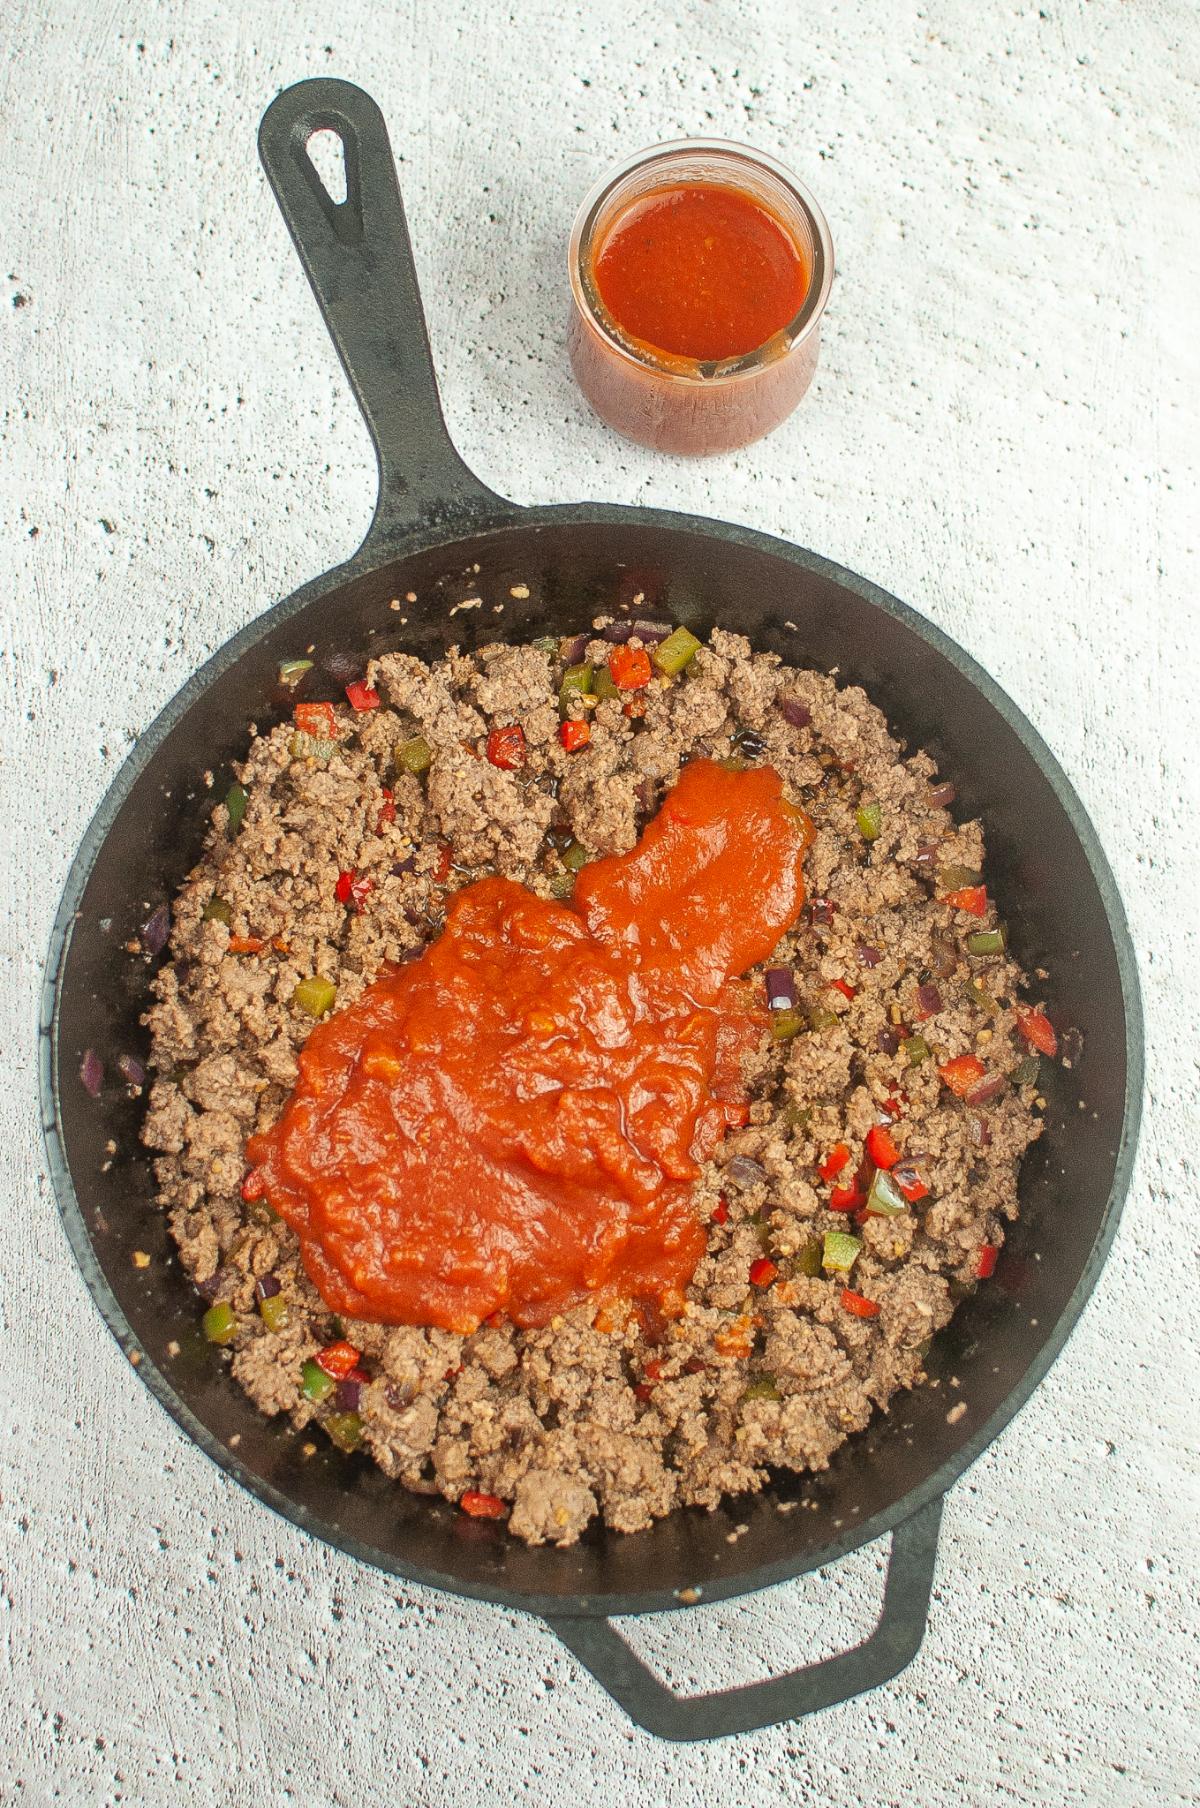 A tomato sauce is added to the ground beef mixture.